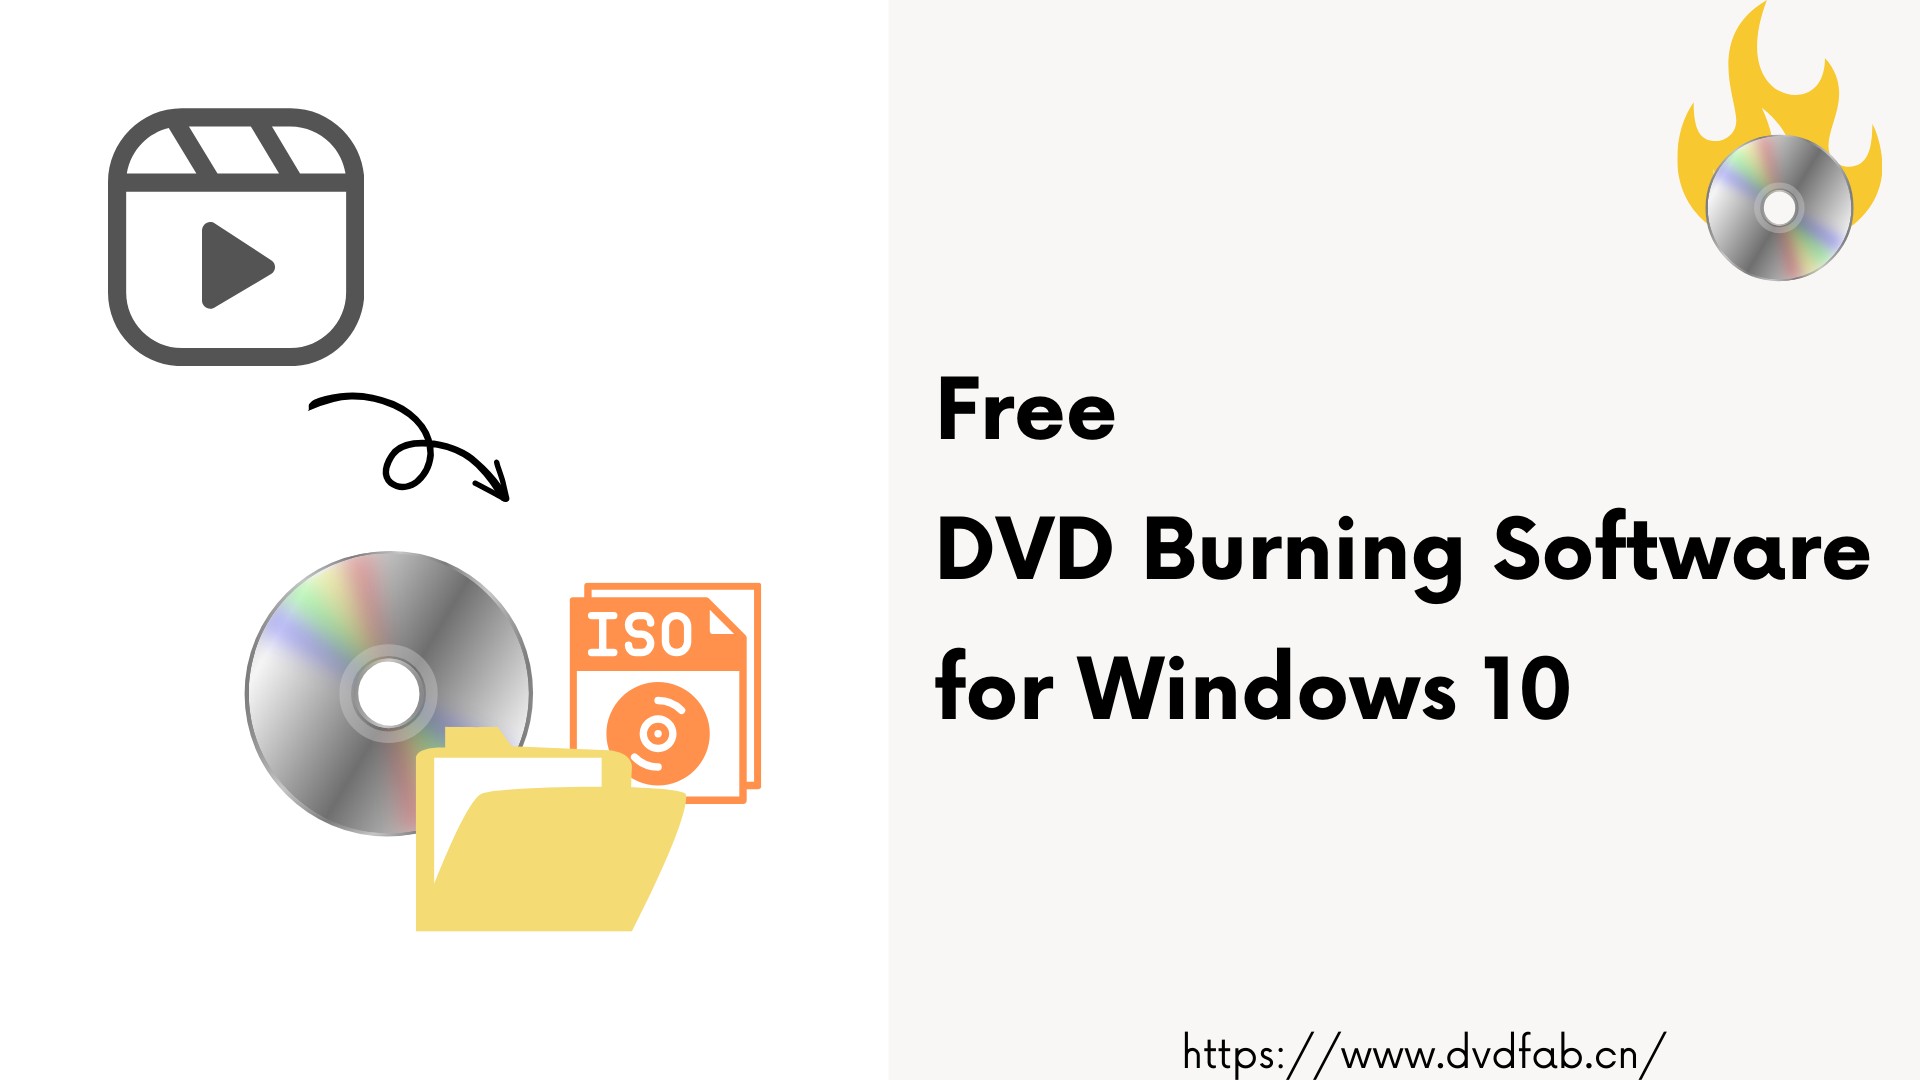 Discover the Top Free DVD Burning Software for Windows 10